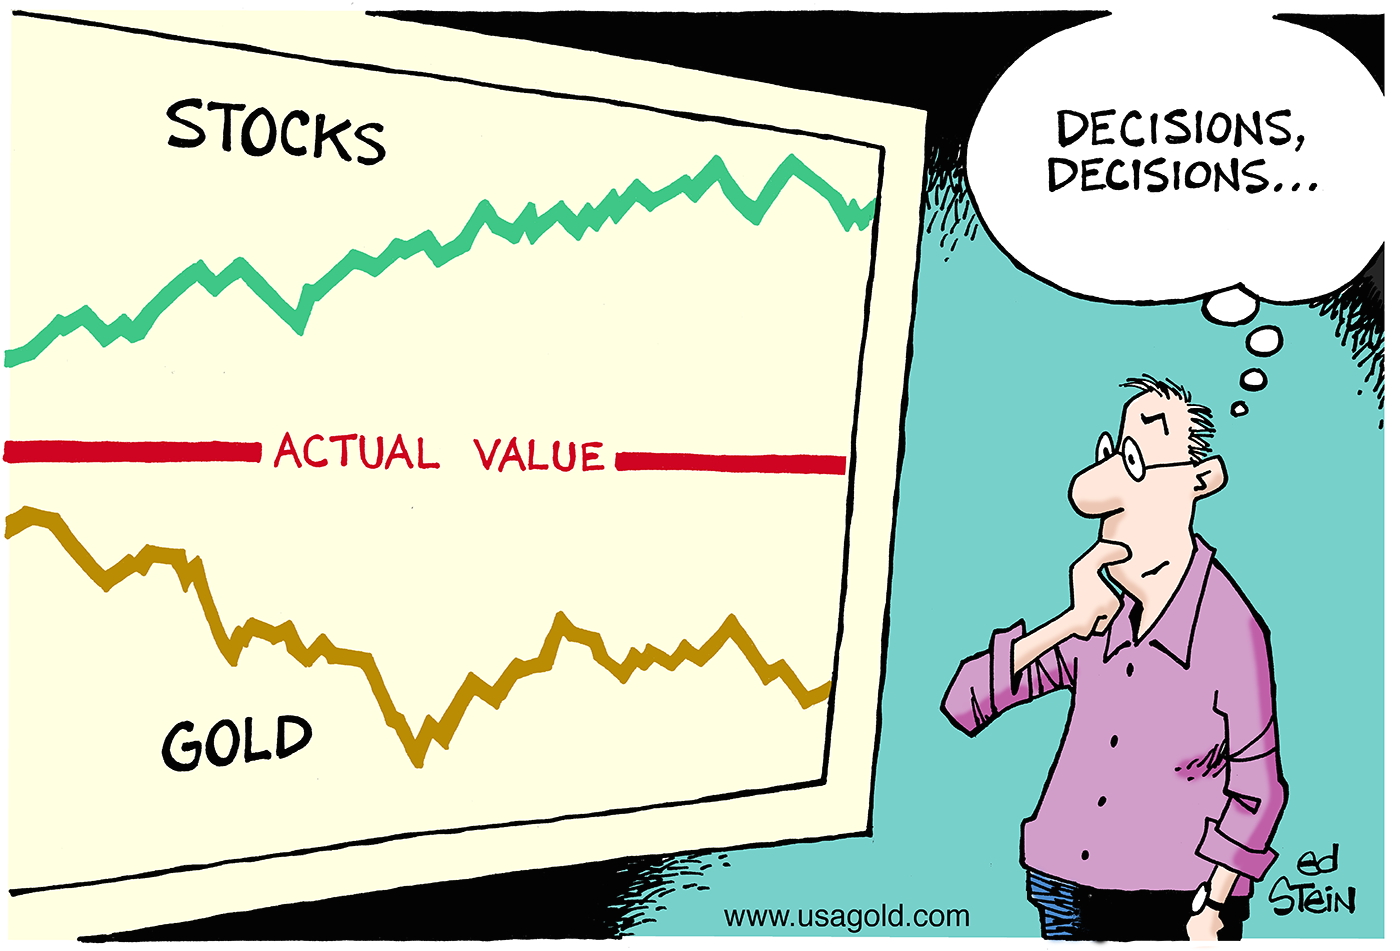 Ed Stein cartoon showing stocks and gold with investor thinking 'decisions, decisions. . .'